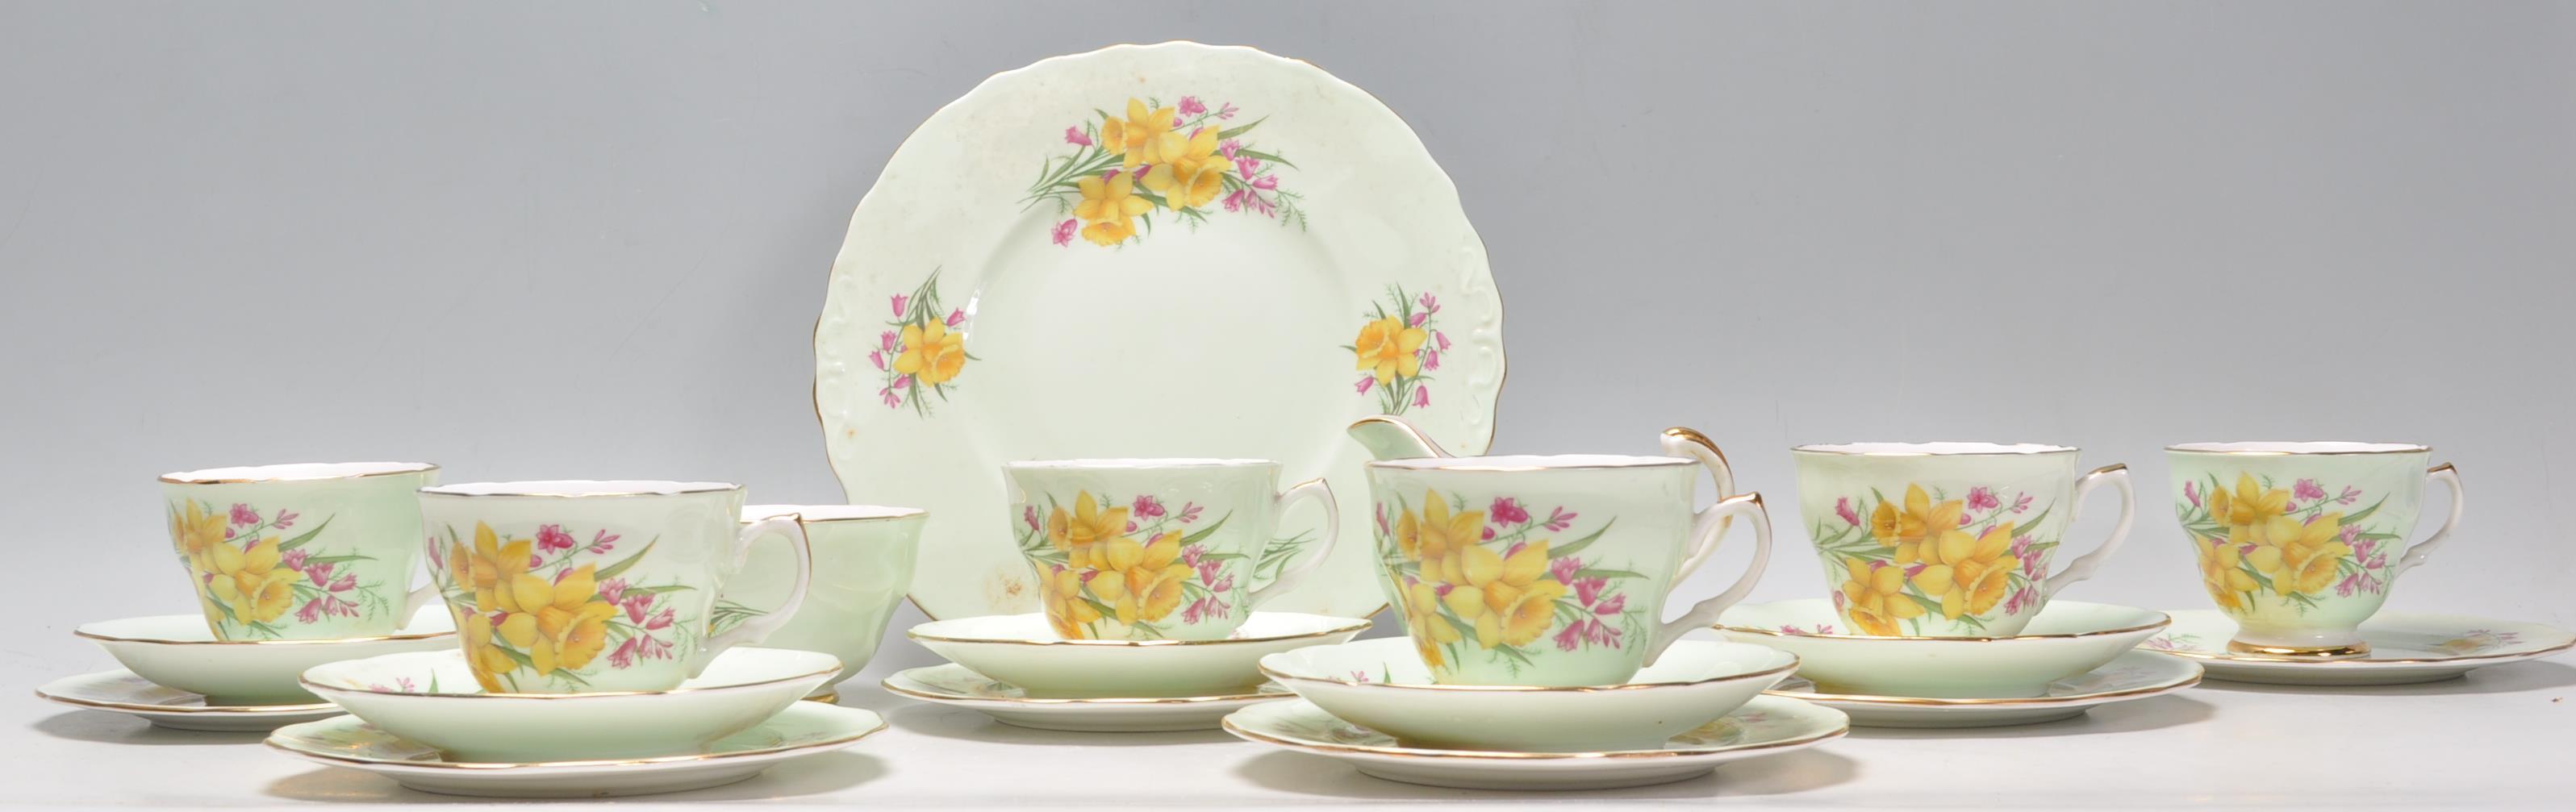 An early 20th century porcelain chintz pattern by Imperial China. The set to include green ground